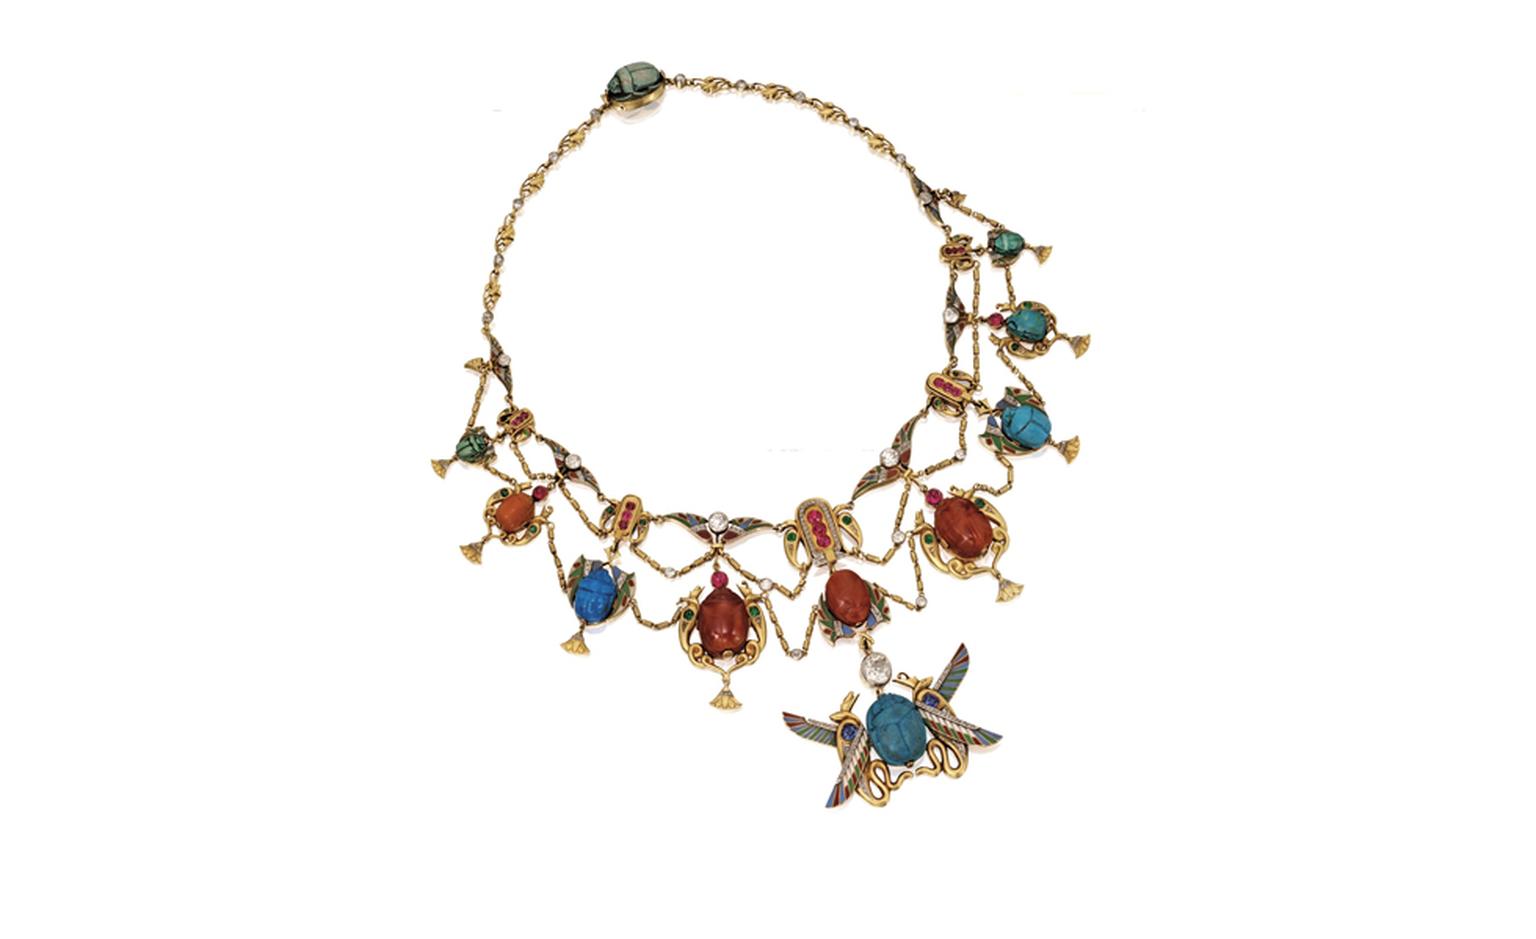 Lot 66 Gold, Platinum and Gem-Set Egyptian Revival Necklace and Pair of Bracelets, Early 20th Century Est. $40/60,000. SOLD FOR $50,000